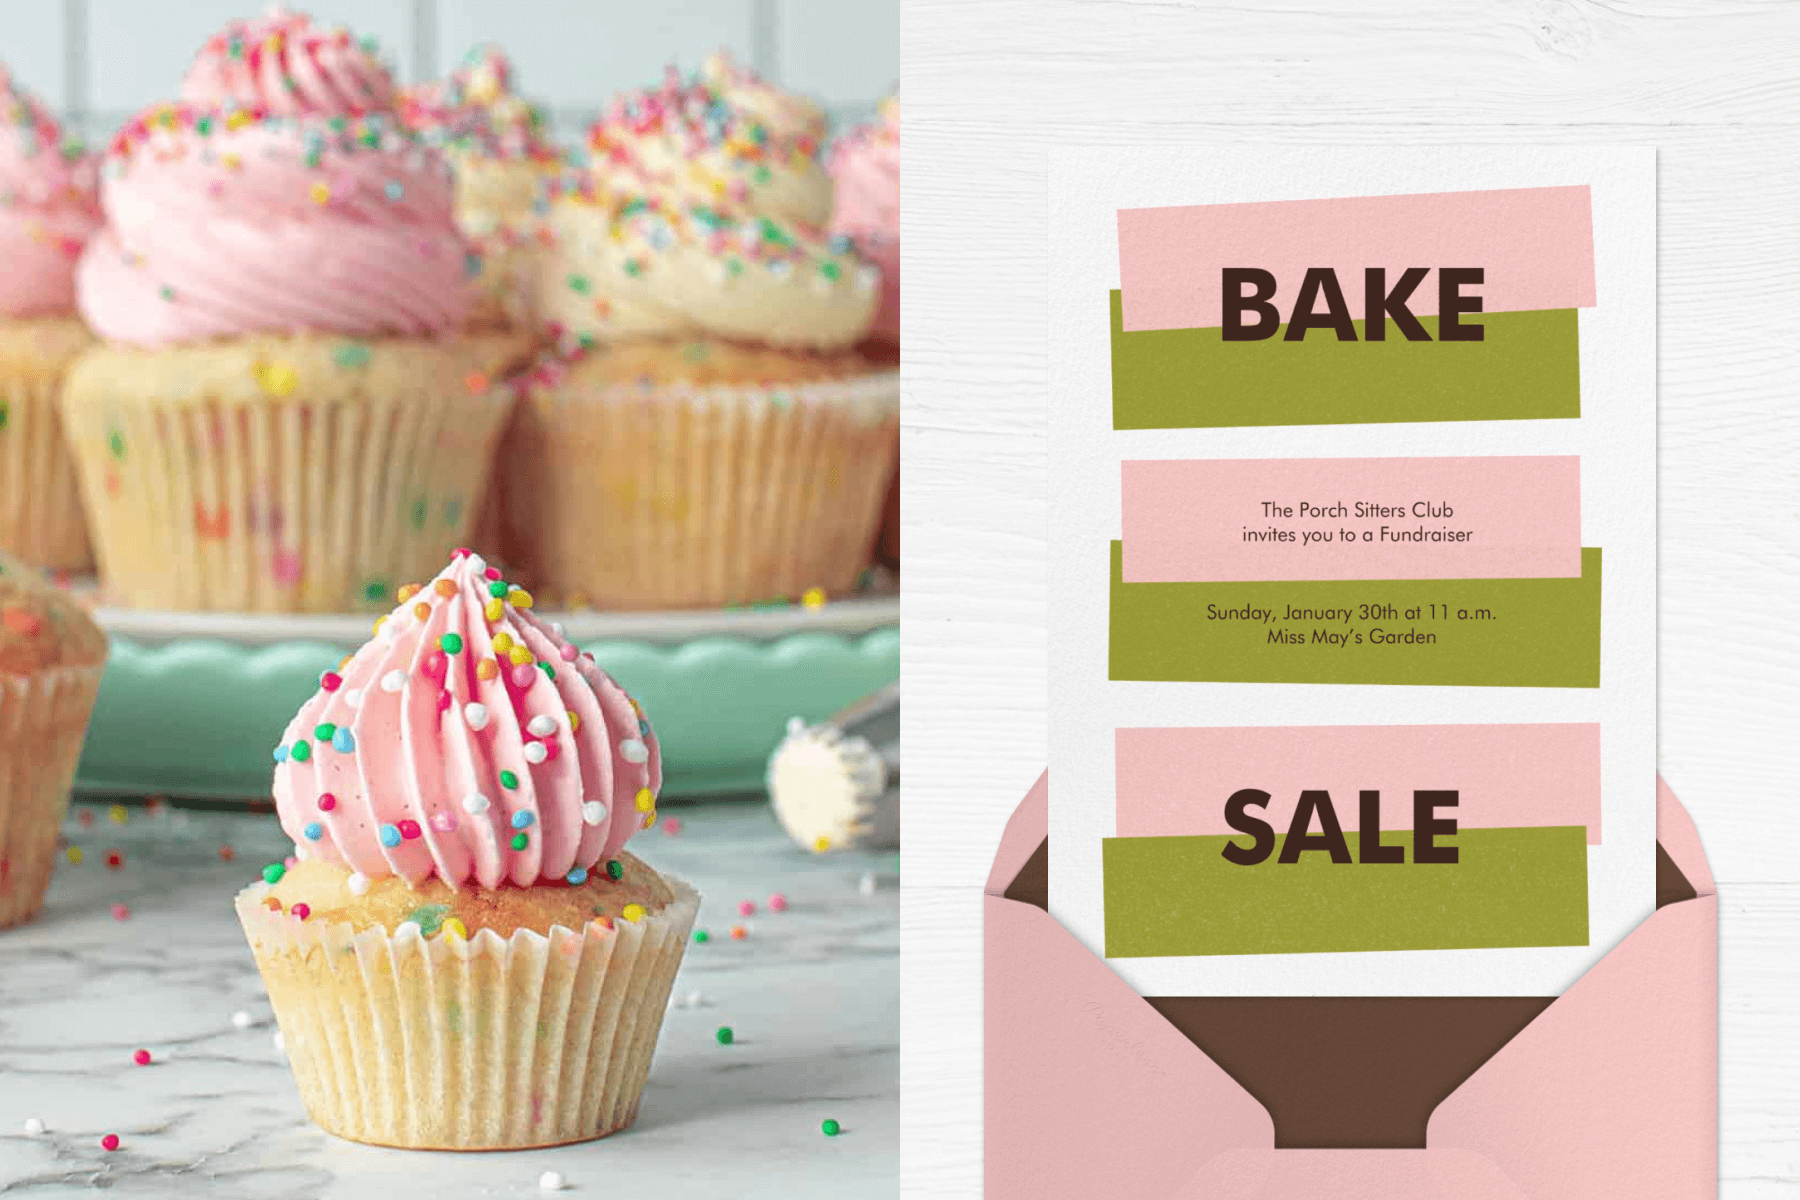 Left: A vanilla cupcake with pink frosting and rainbow sprinkles sits in front of several other cupcakes. Right: A bake sale invitation has three thick pink bars overlapping green bars to form an abstract shape, with a pink envelope and brown liner.